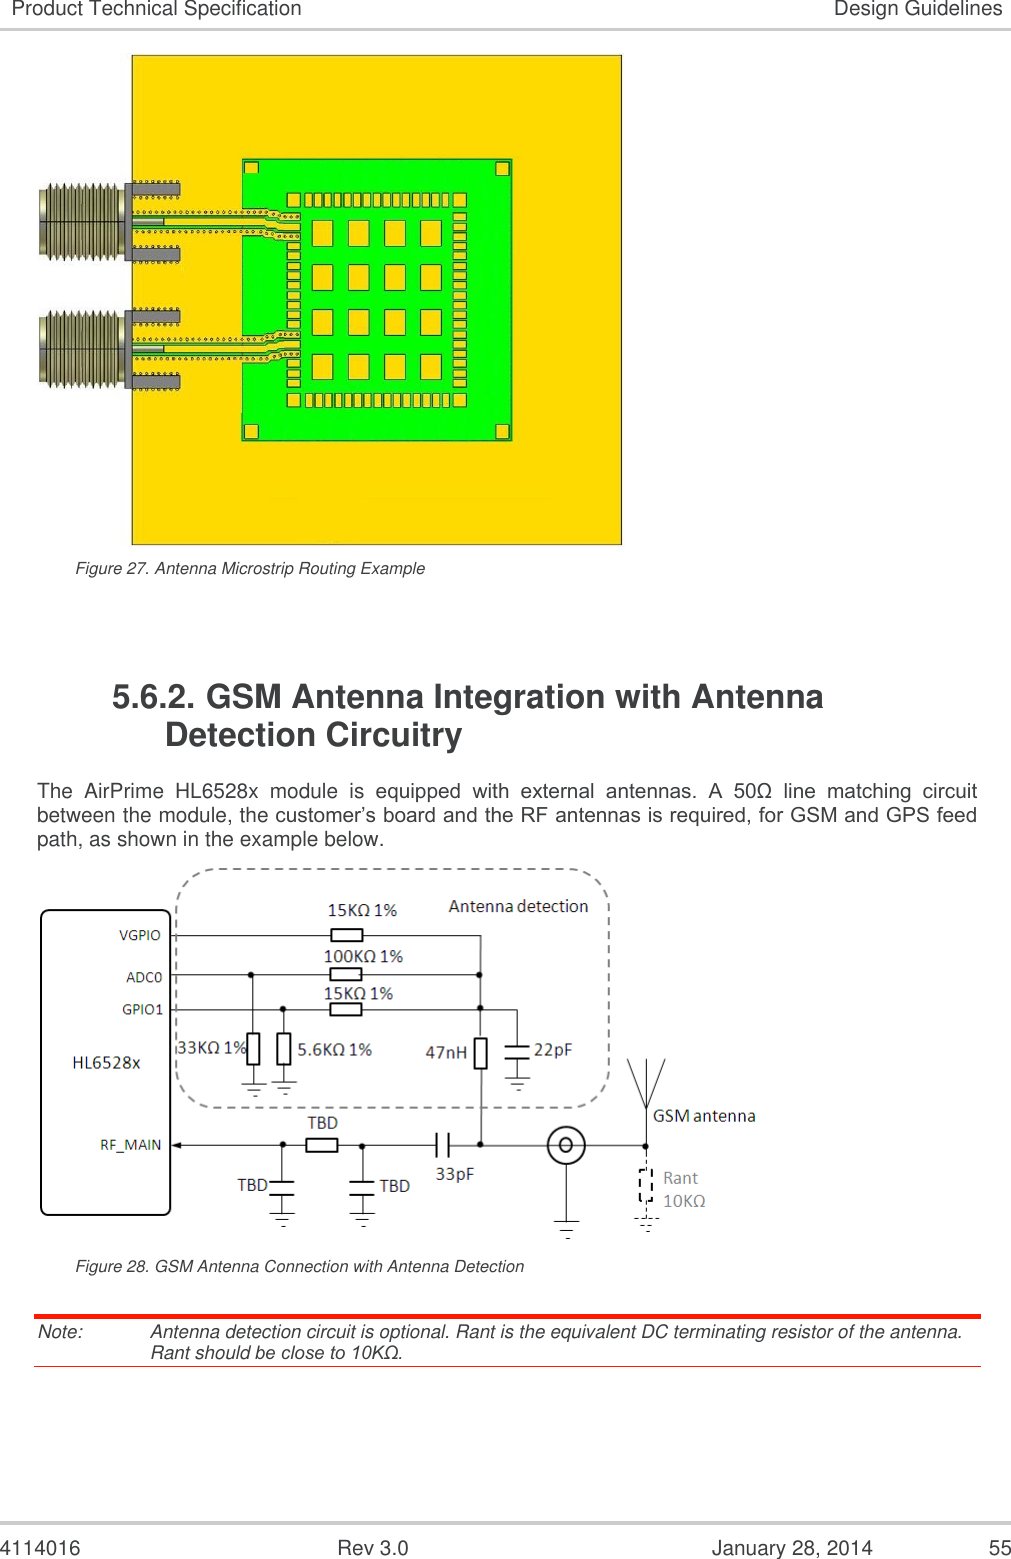  4114016  Rev 3.0  January 28, 2014  55 Product Technical Specification Design Guidelines  Figure 27. Antenna Microstrip Routing Example  5.6.2. GSM Antenna Integration with Antenna Detection Circuitry The  AirPrime  HL6528x  module  is equipped  with  external  antennas.  A  50Ω  line  matching  circuit between the module, the customer’s board and the RF antennas is required, for GSM and GPS feed path, as shown in the example below.  Figure 28. GSM Antenna Connection with Antenna Detection Note:   Antenna detection circuit is optional. Rant is the equivalent DC terminating resistor of the antenna. Rant should be close to 10KΩ.   